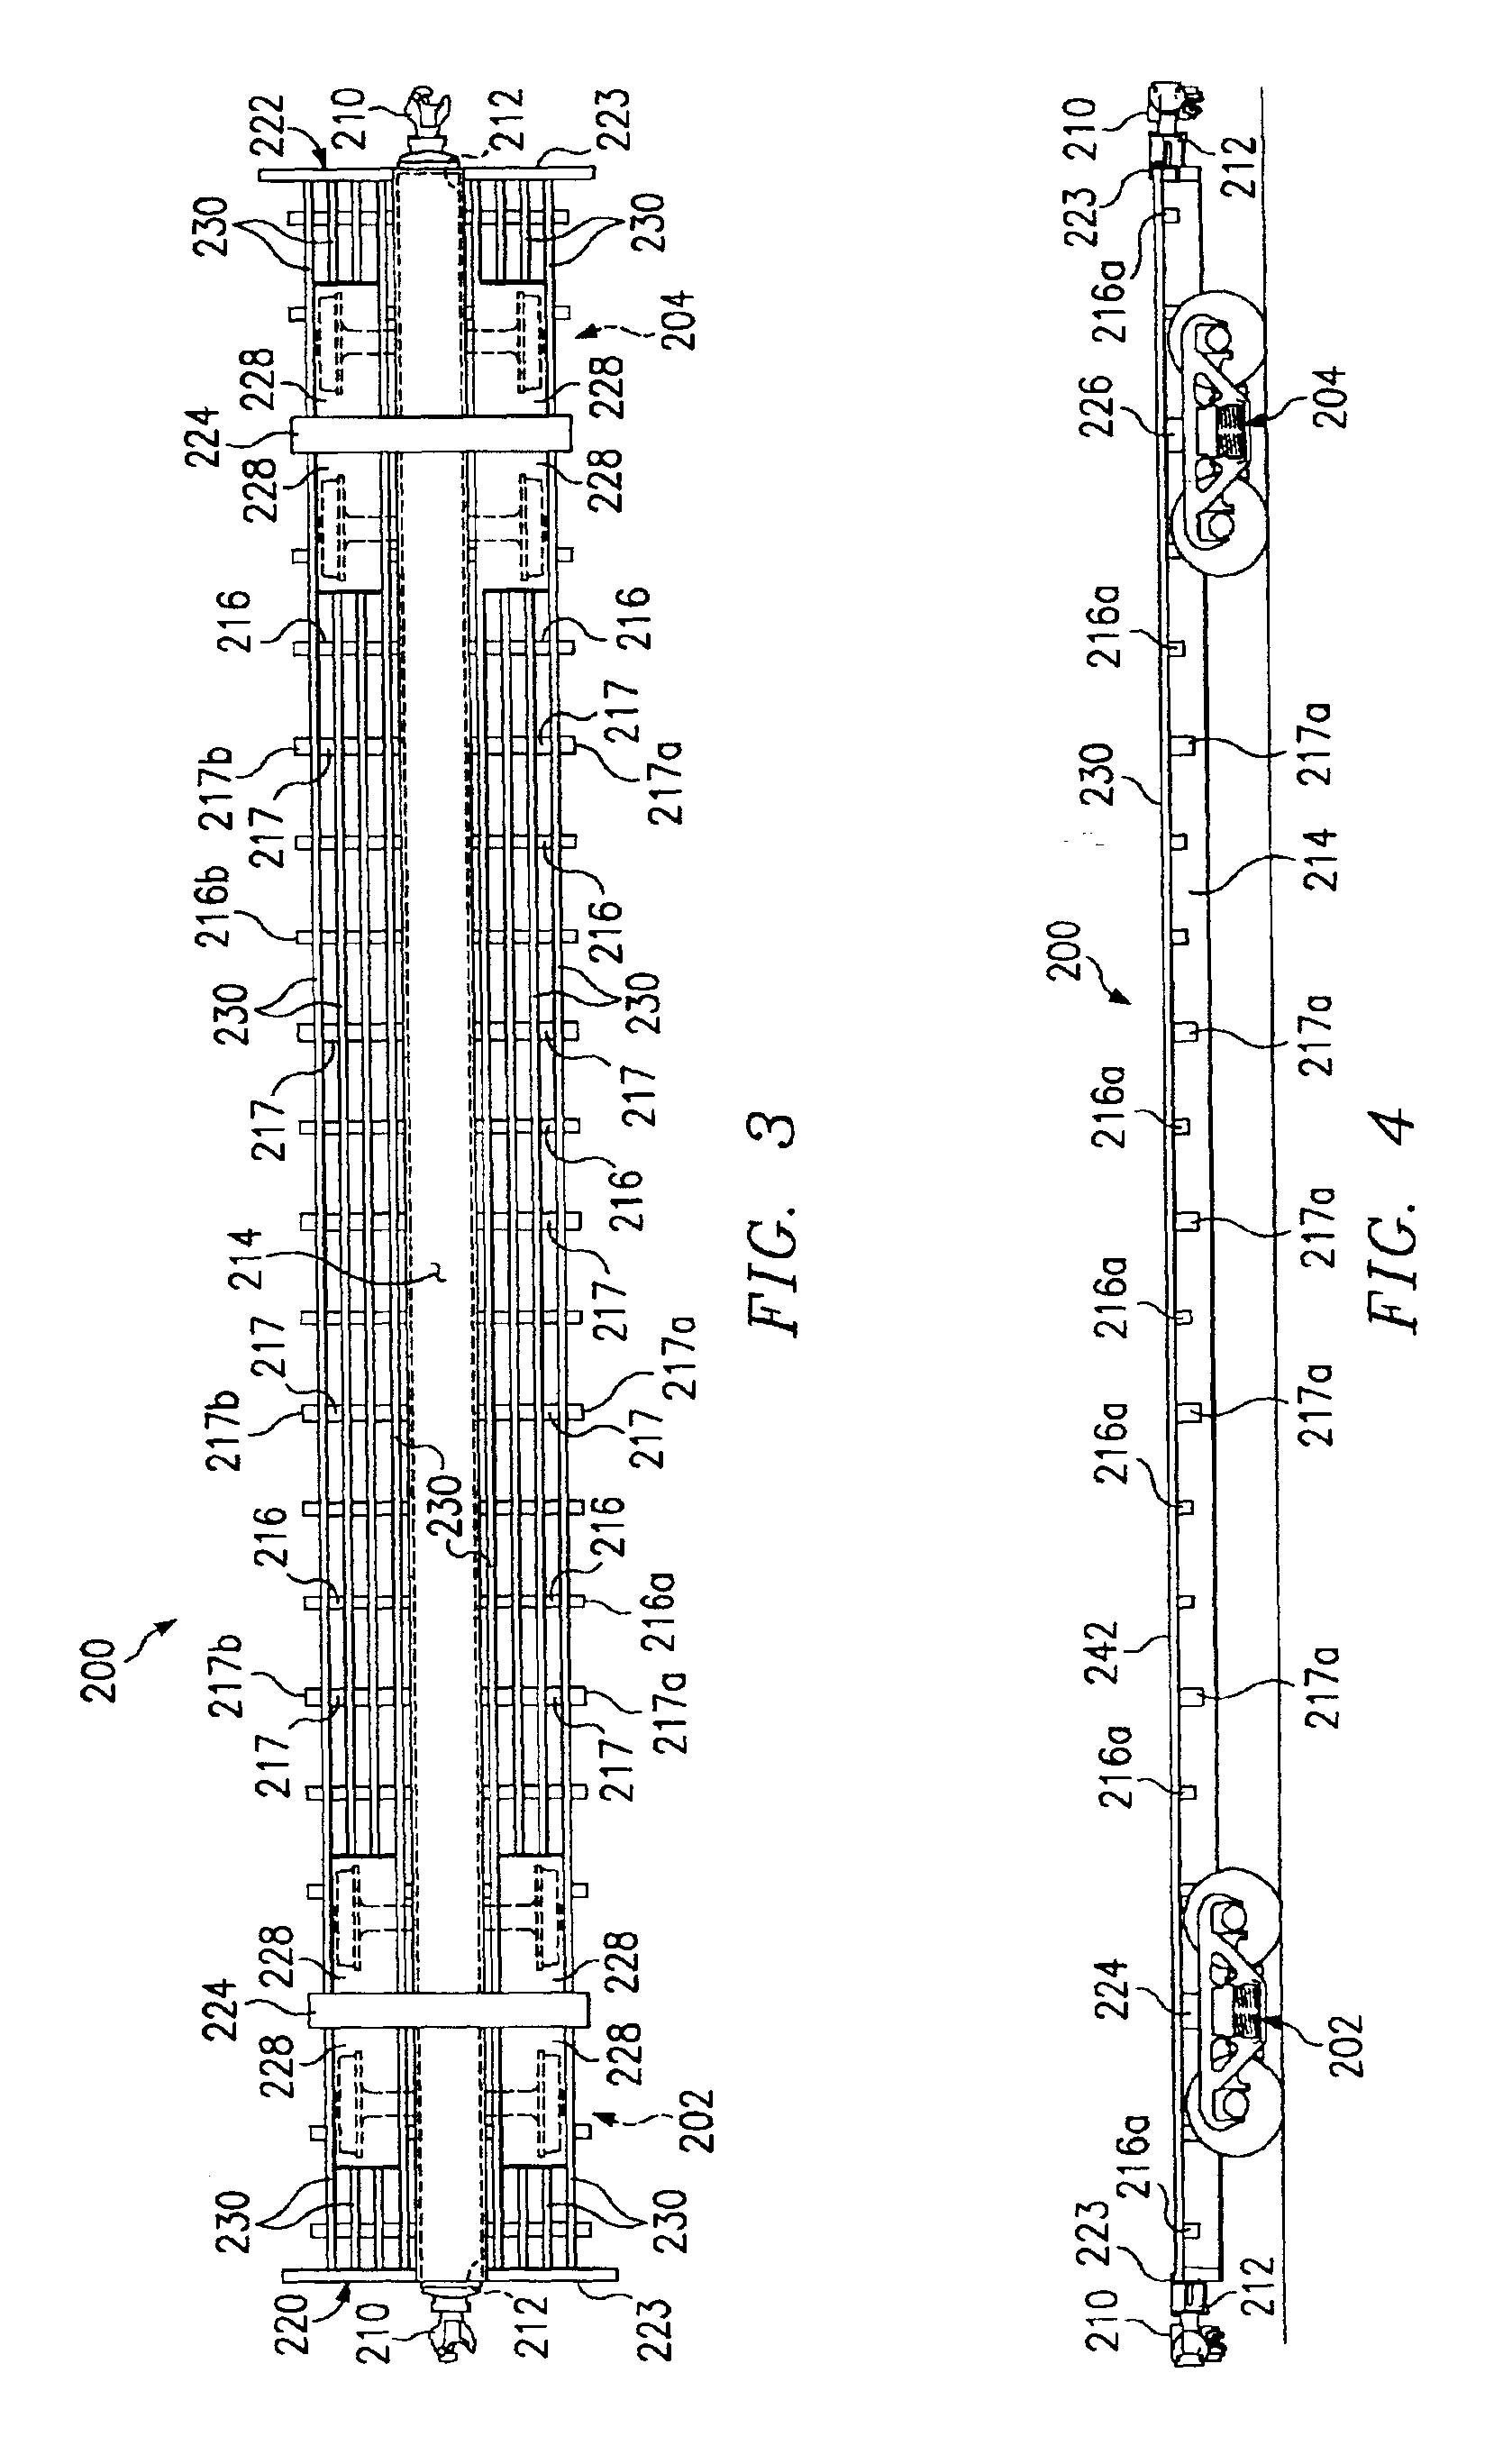 Manufacturing method of assembling temperature controlled railway car